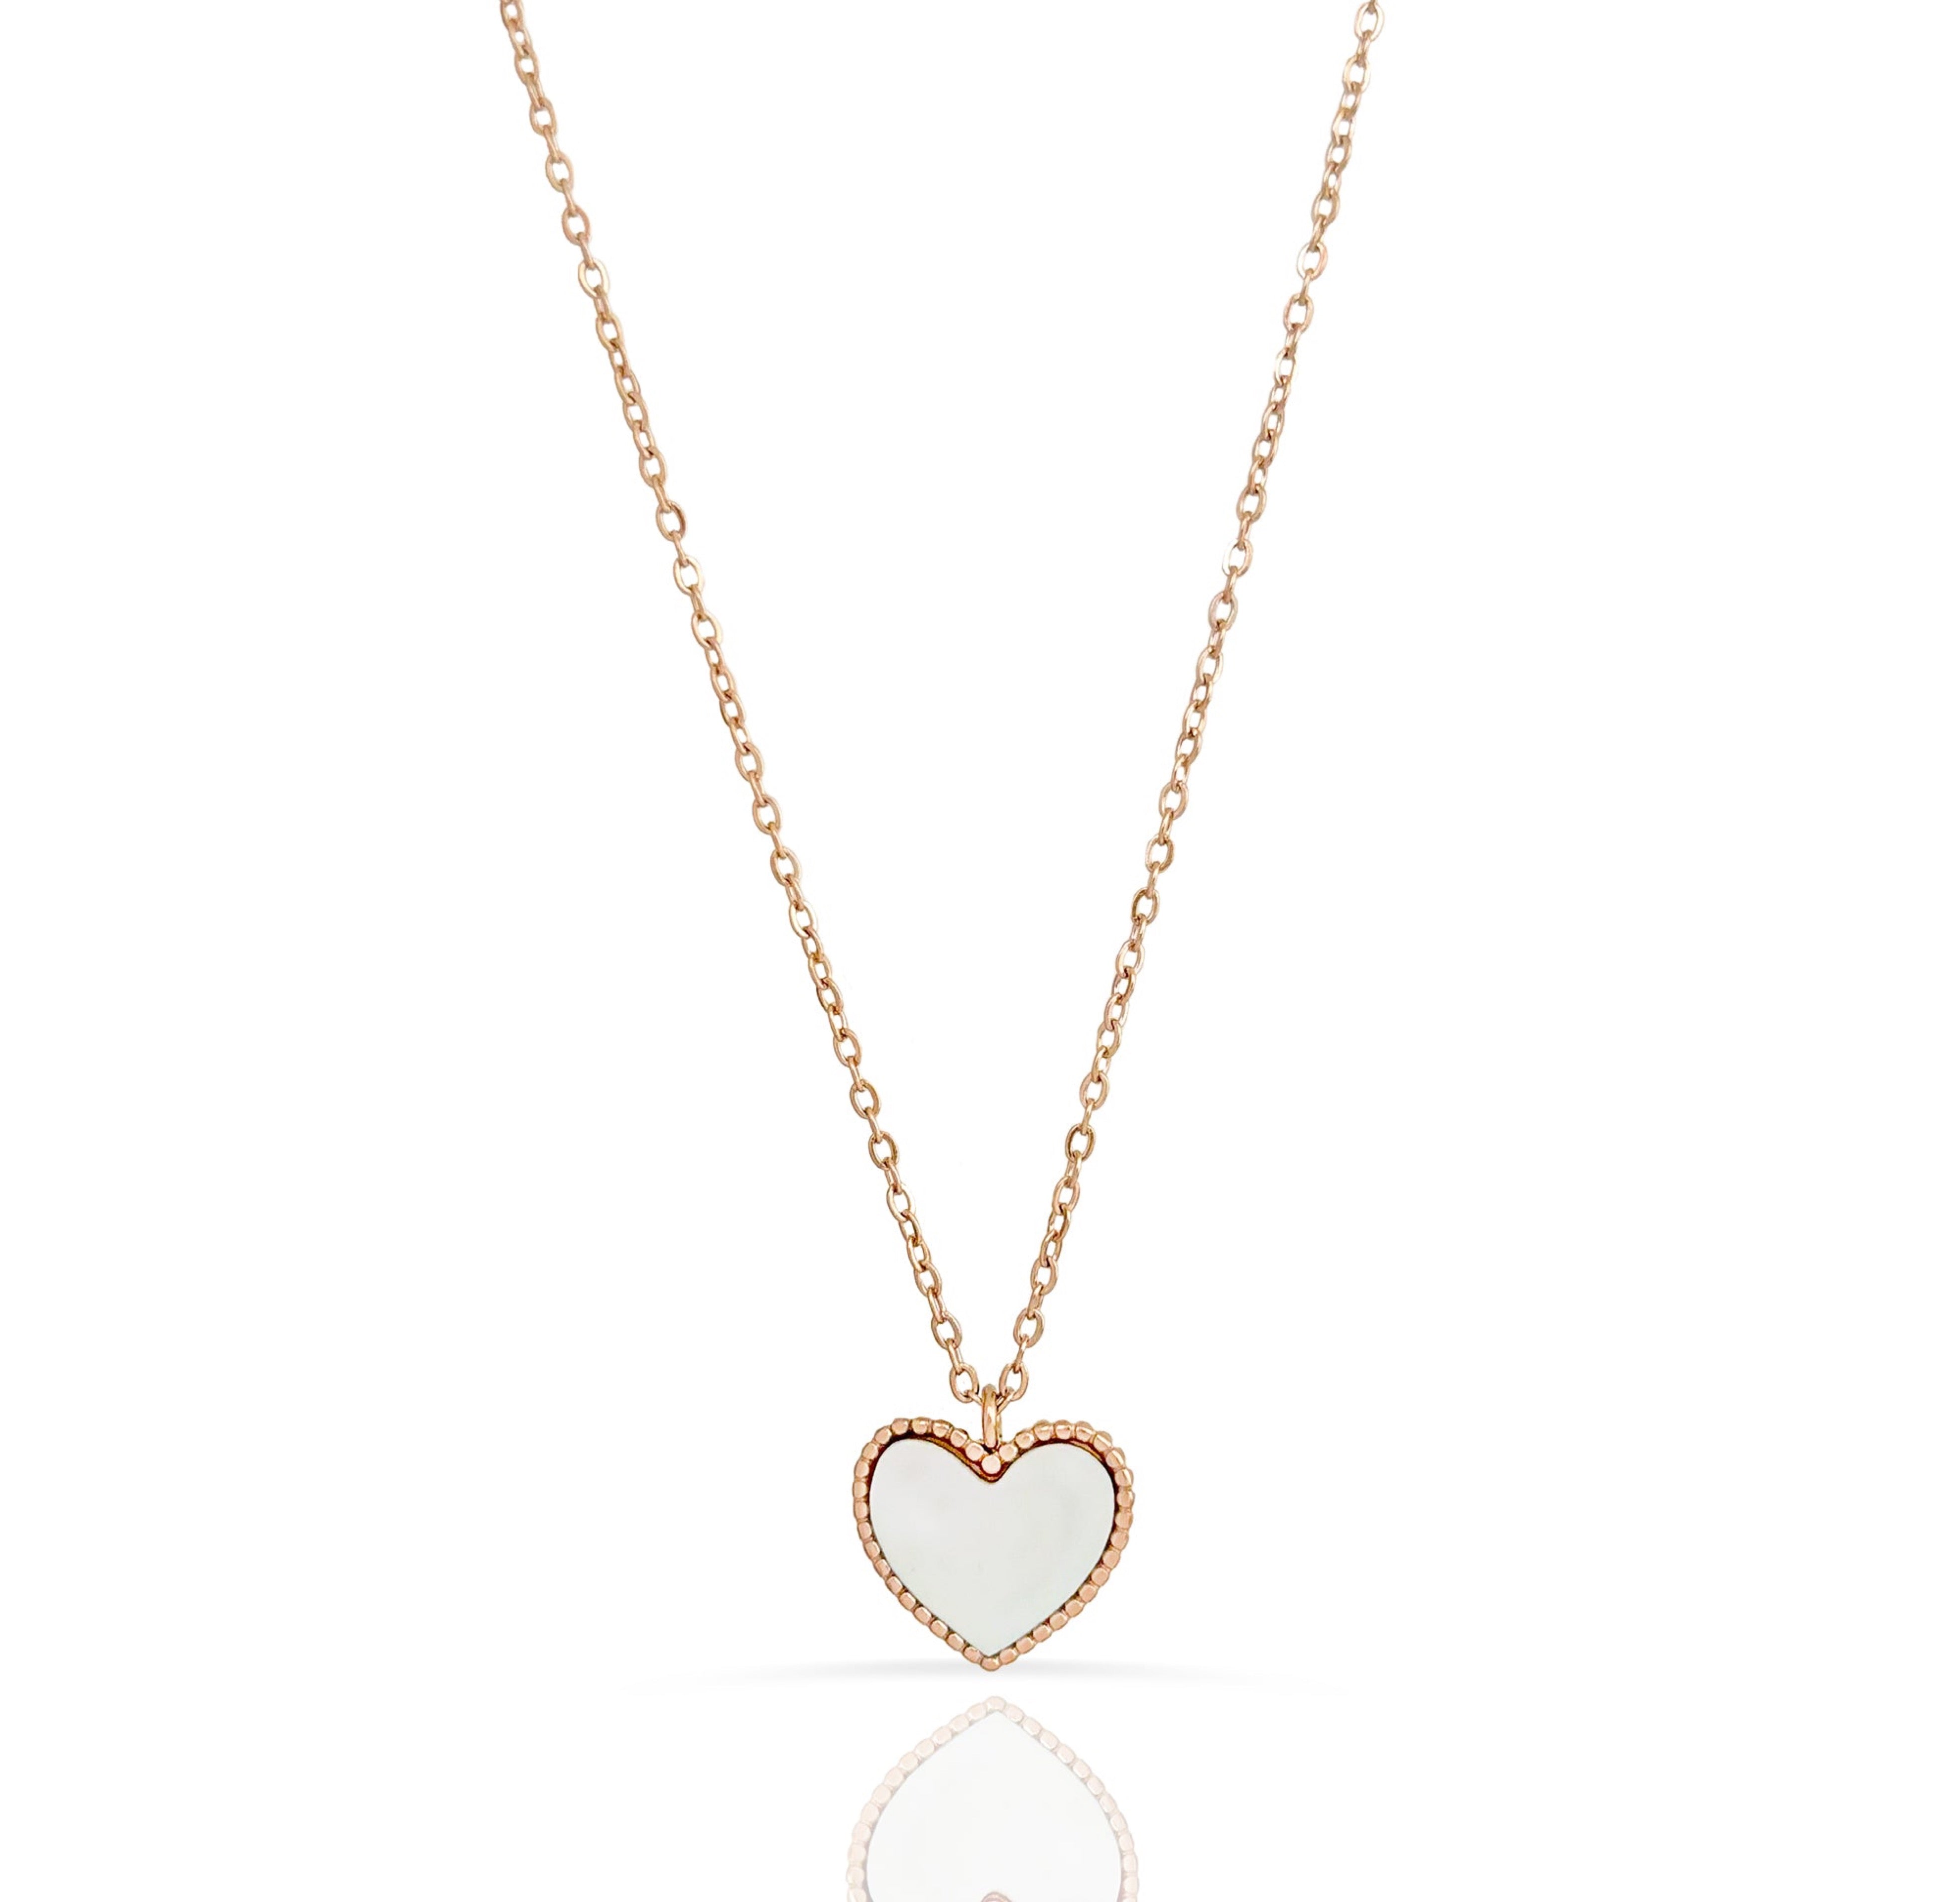 rose gold heart shell pendant necklace waterproof jewelry